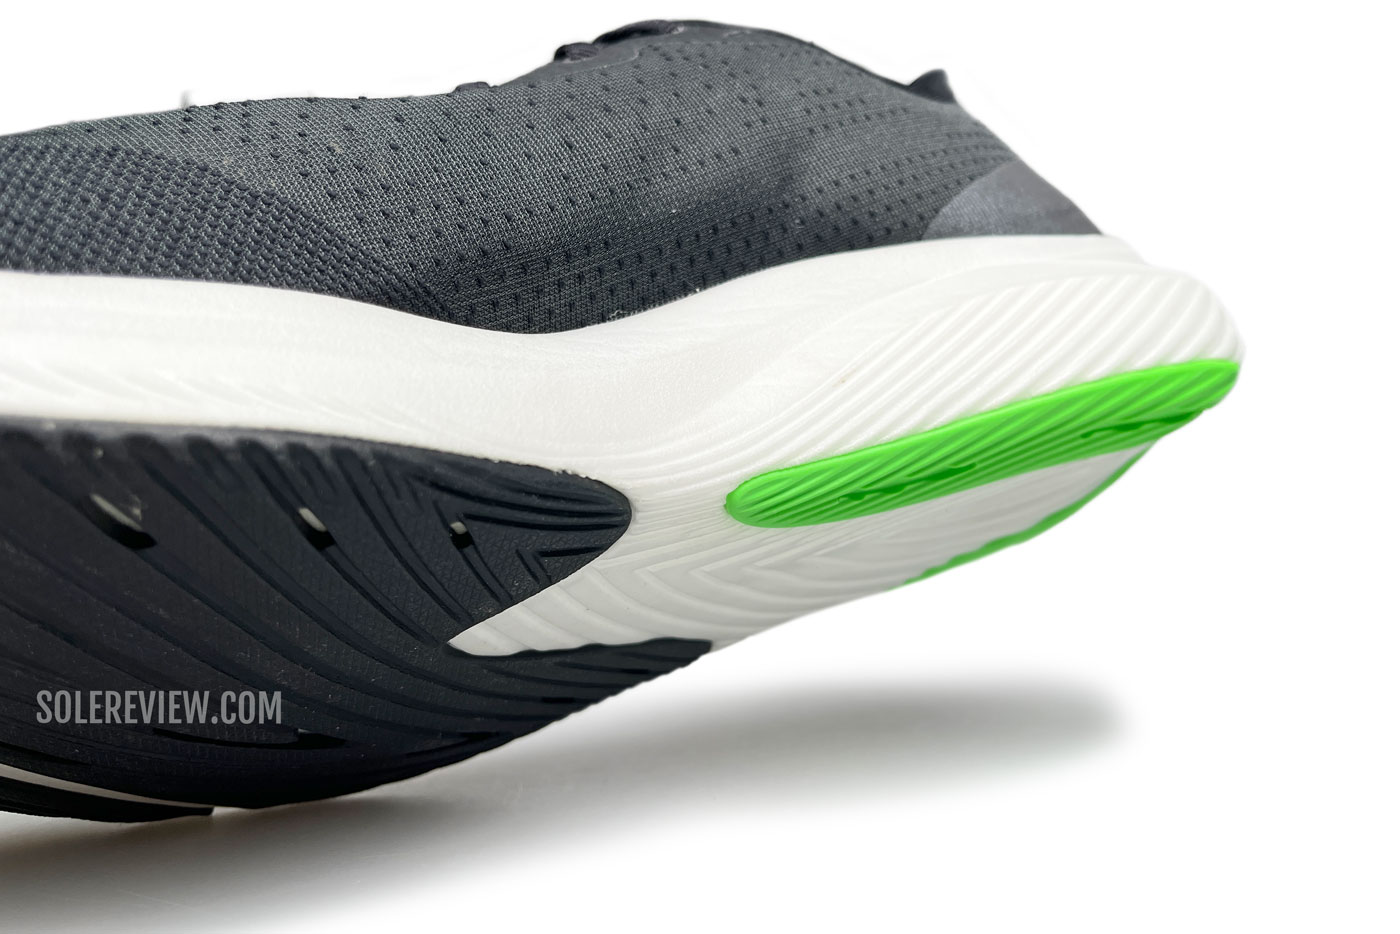 The inner view of the New Balance Fuelcell Rebel V3.